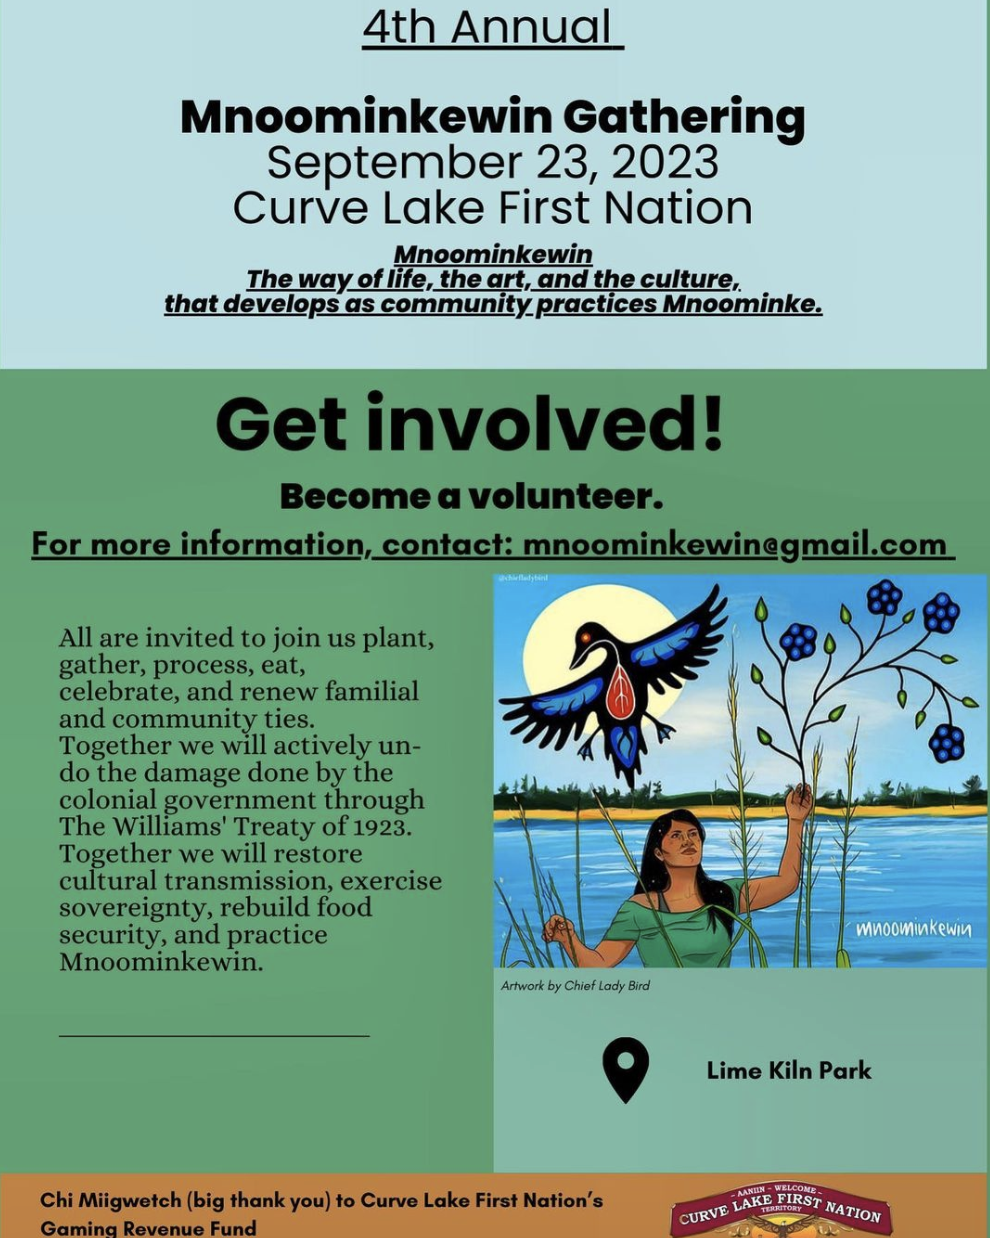 Flyer with light blue and green background with text detailing event and in large text "Get involved!"